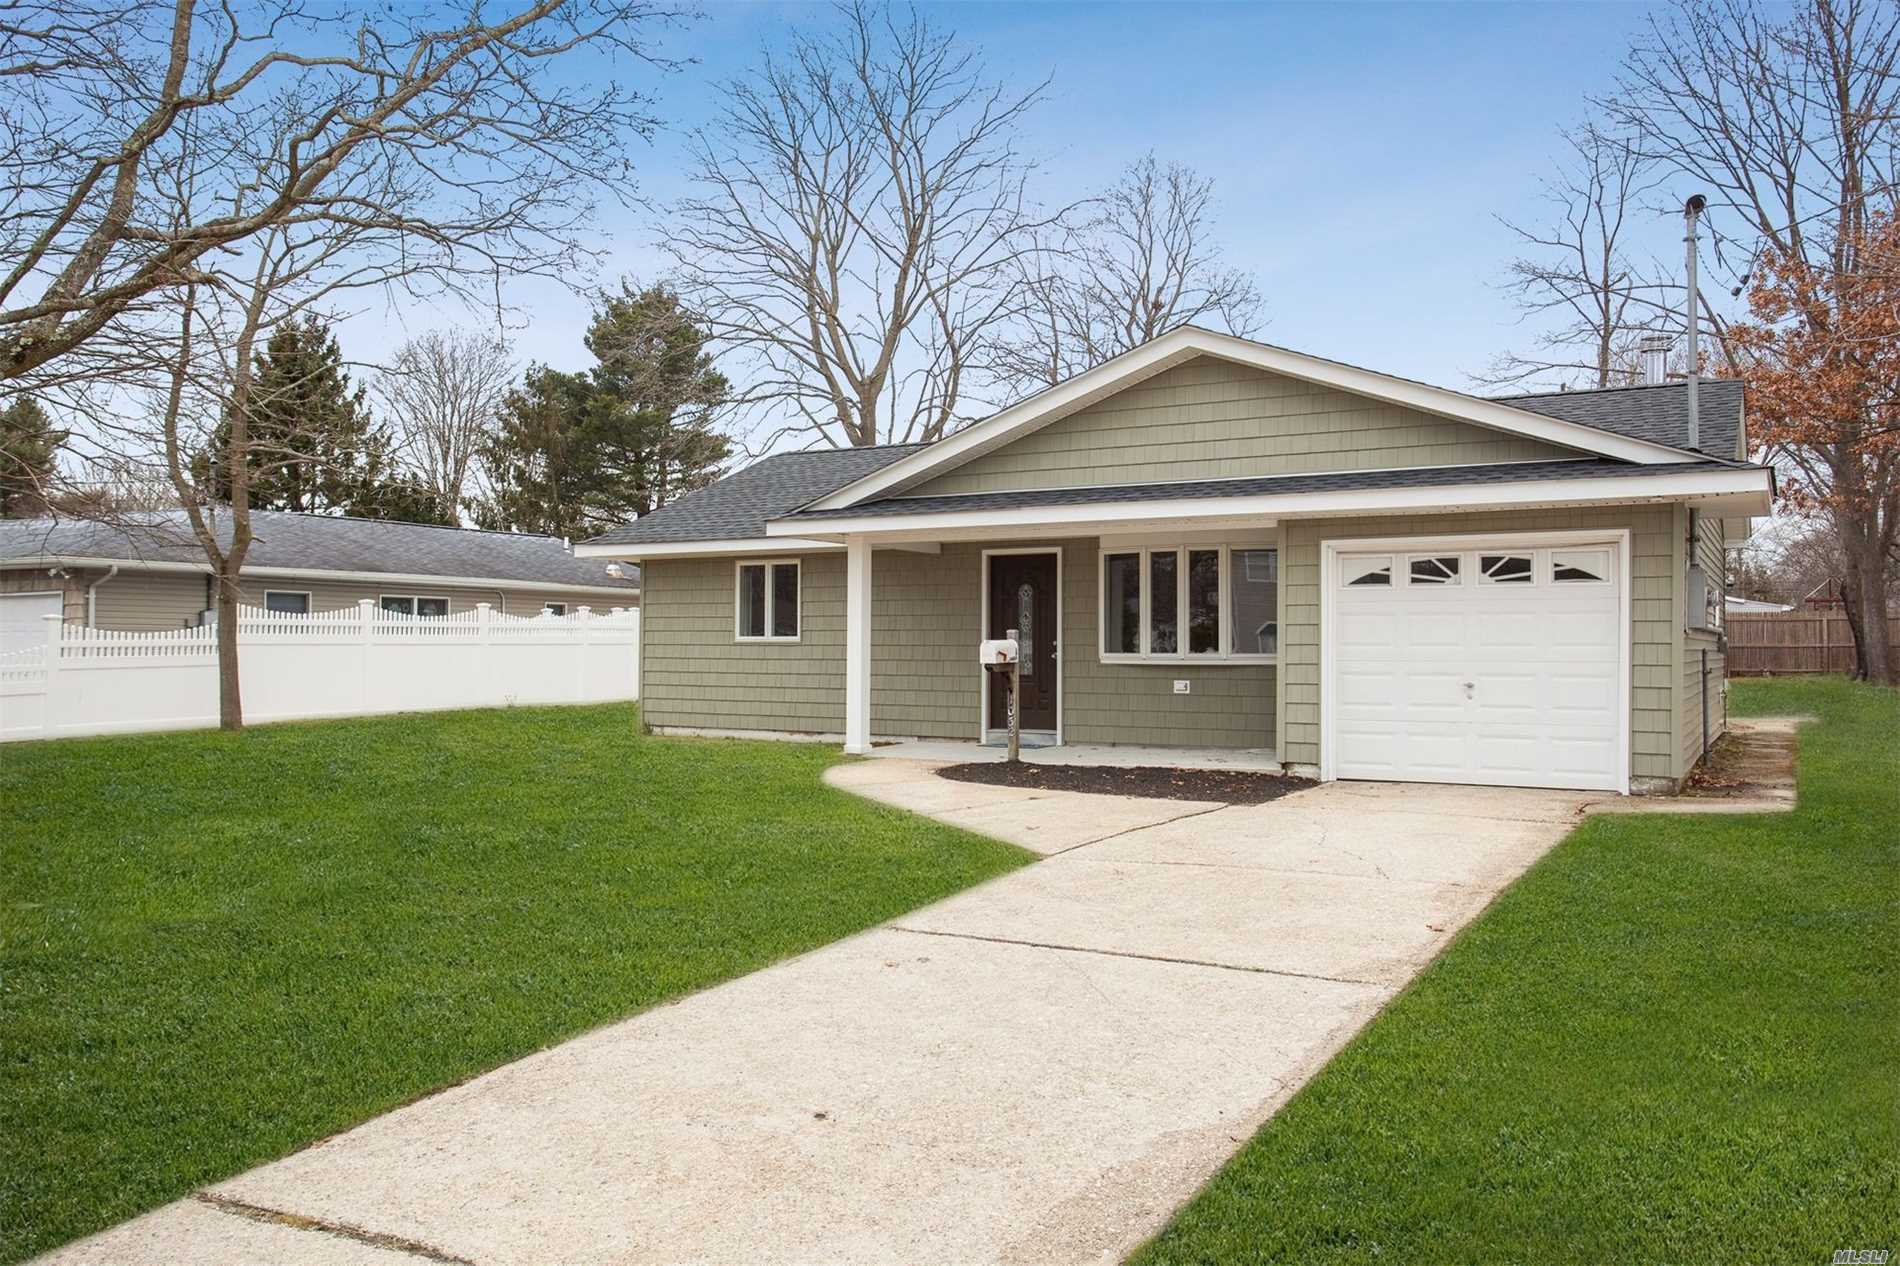 Completely Renovated Open Floor Plan, 3 Br, 1 Full Bath Ranch in a Beautiful Neighborhood. New Roof, Siding, Windows, Heating System, Kitchen, etc. Whirlpool Tub in the Bathroom. Flat Large Yard, West Islip Schools